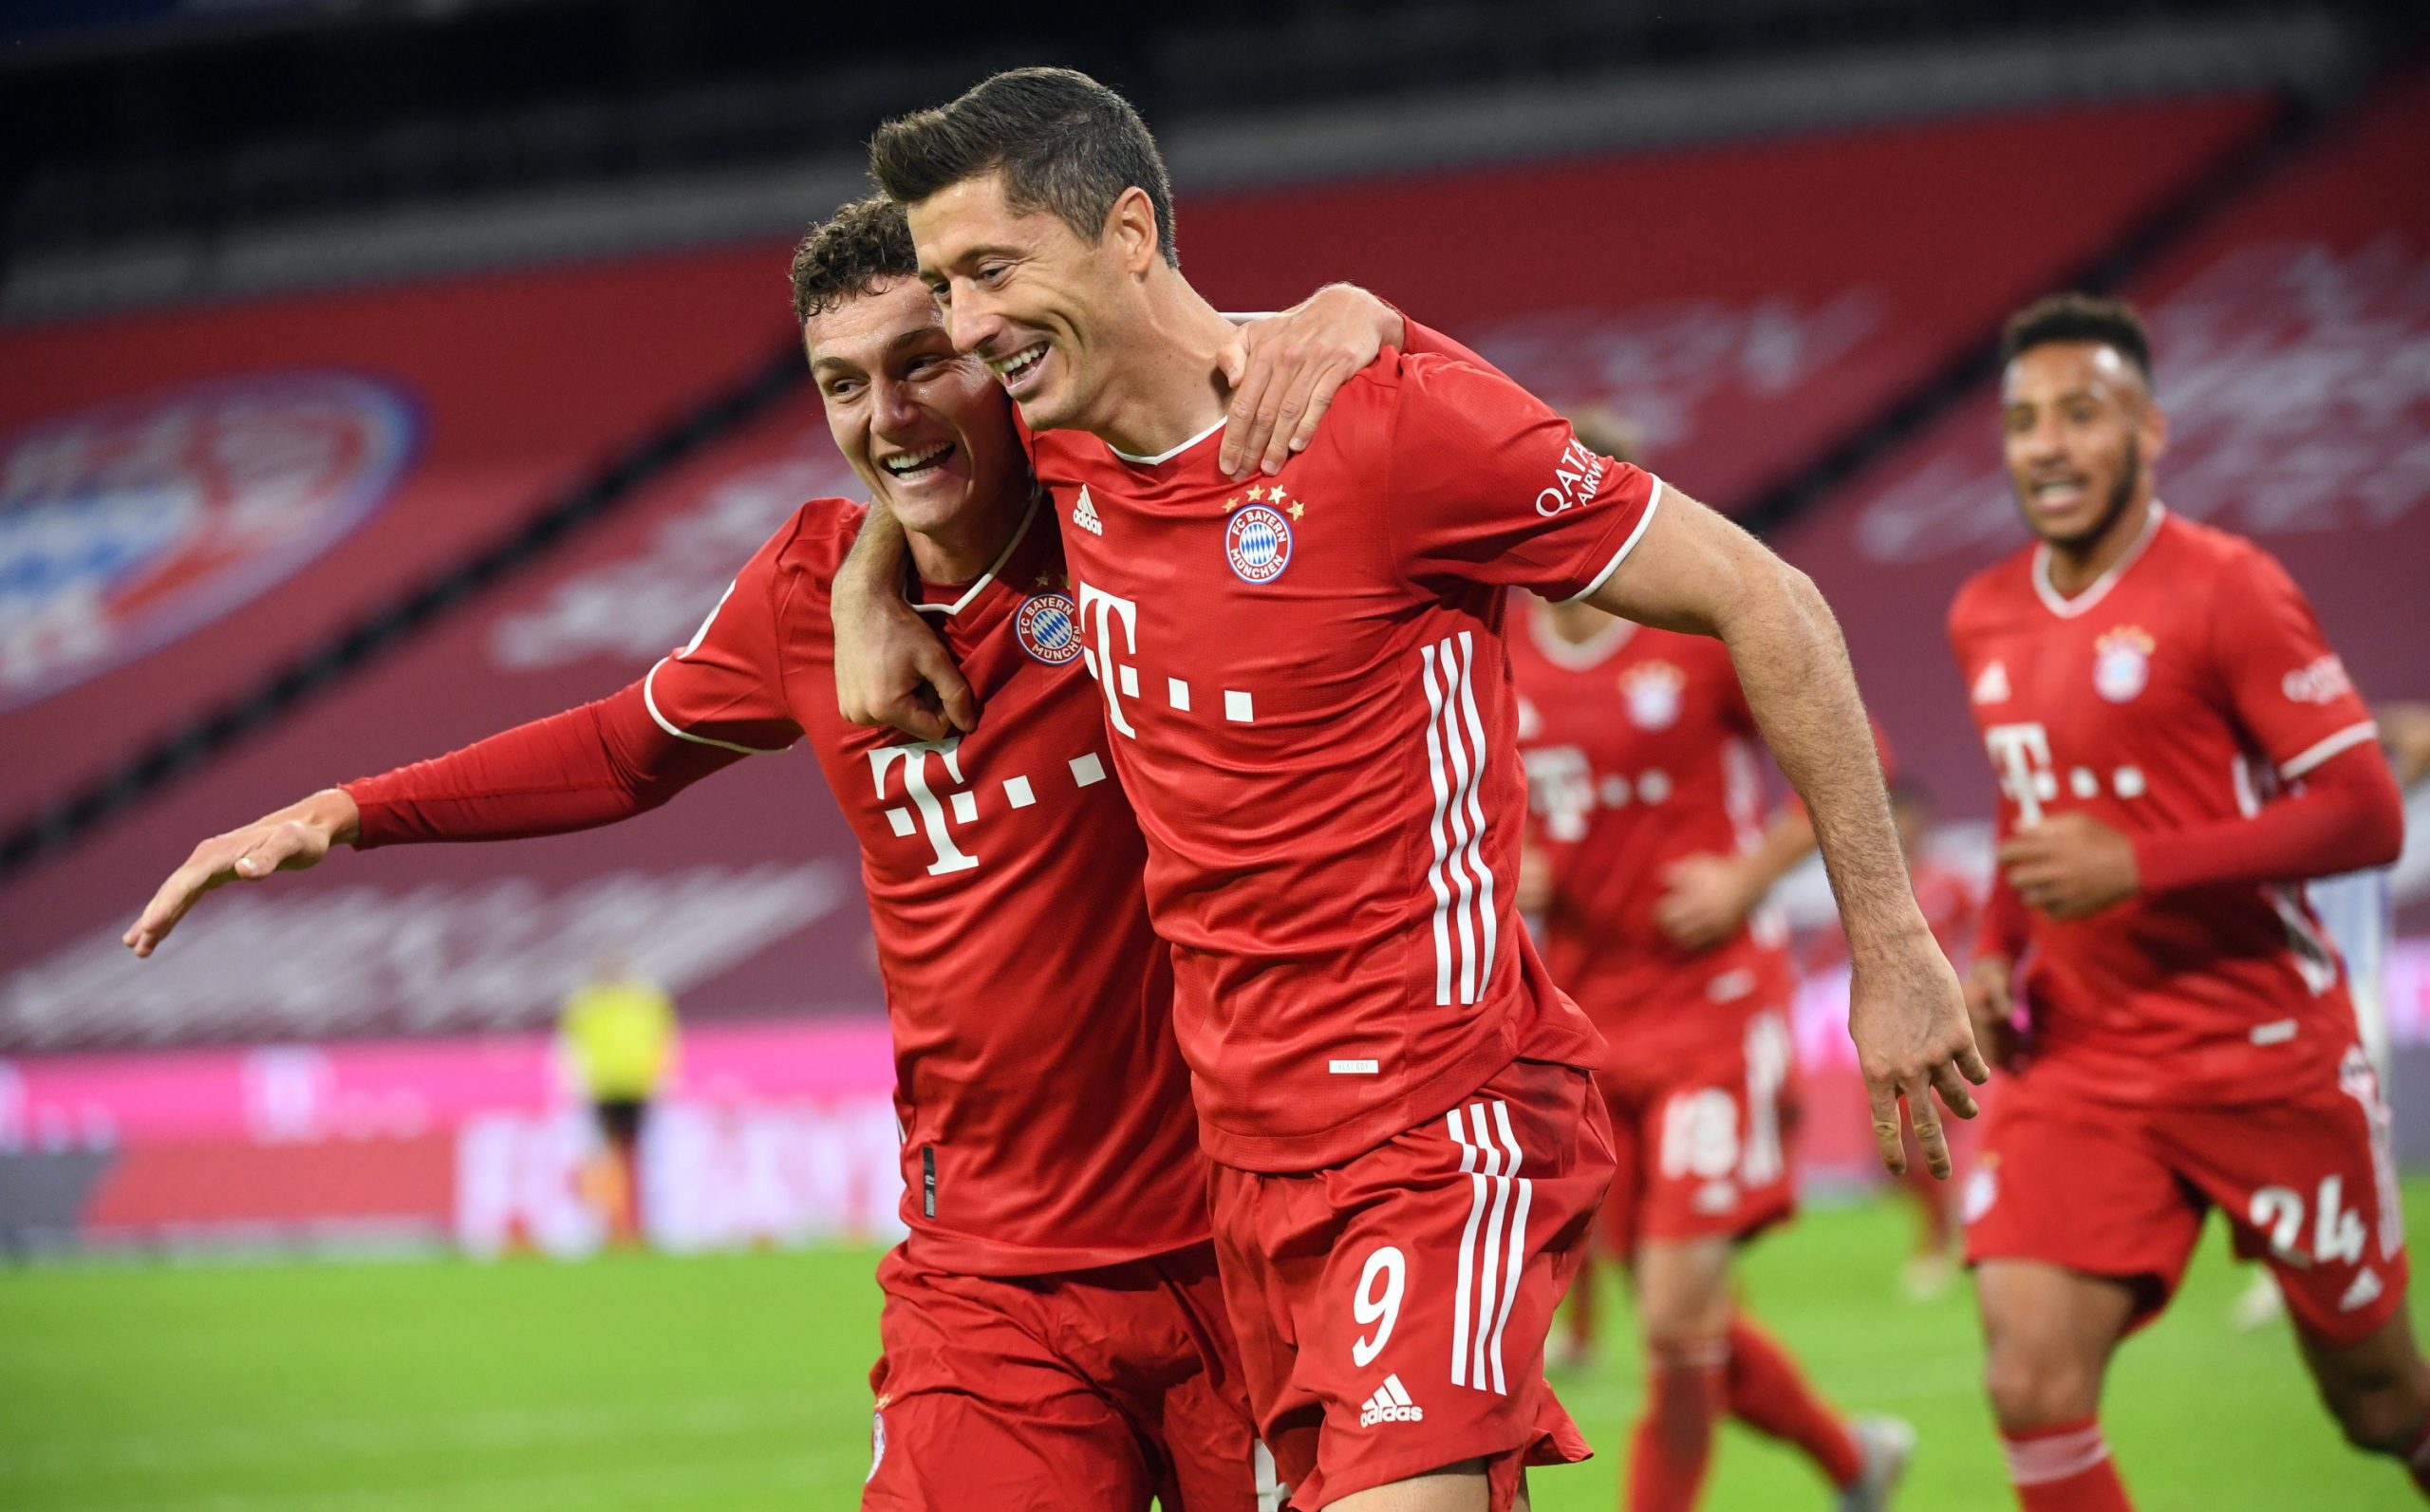 04 October 2020, Bavaria, Munich: Bayern Munich's Robert Lewandowski (R) celebrates scoring his side's third goal with teammate Benjamin Pavard during the German Bundesliga soccer match between Bayern Munich and Hertha Berlin at the Allianz Arena. Photo: Sven Hoppe/dpa - IMPORTANT NOTICE: DFL and DFB regulations prohibit any use of photographs as image sequences and/or quasi-video.